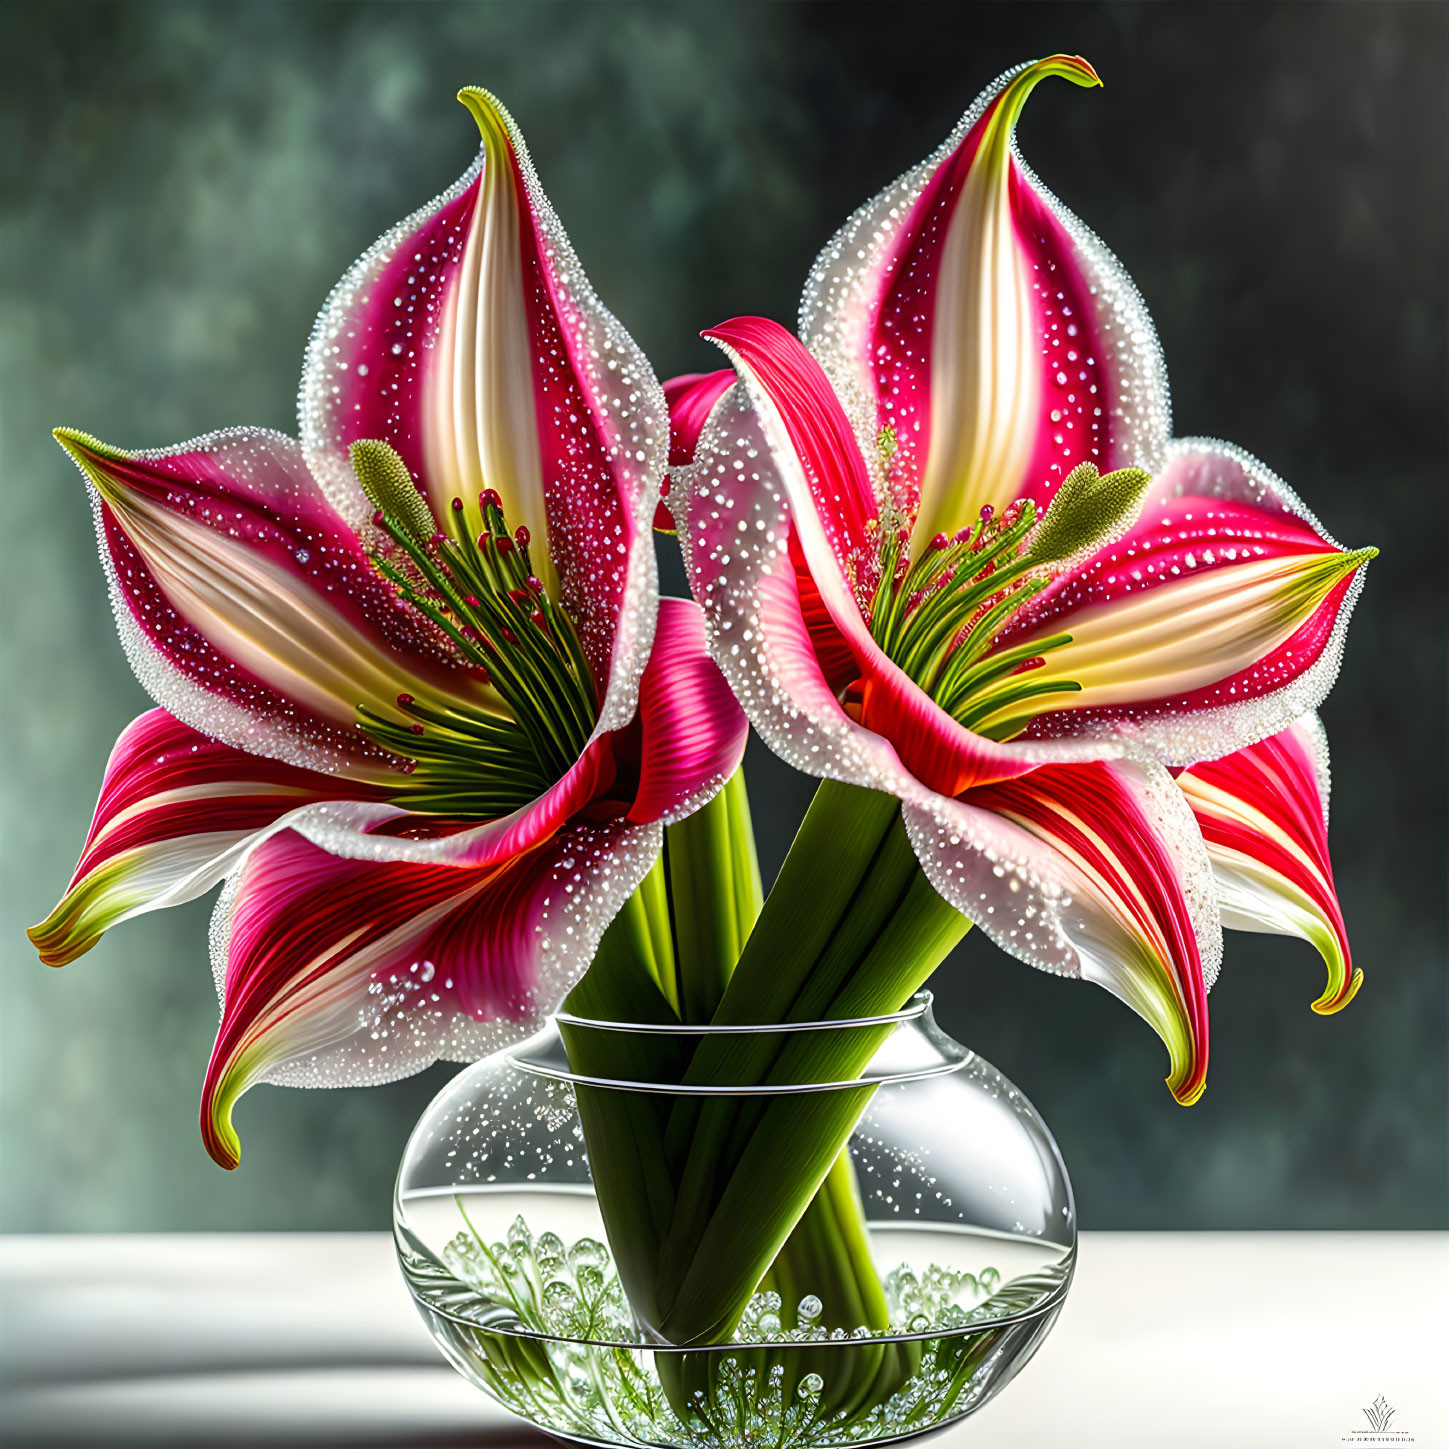 Hyper-realistic digital art: Red and white striped lilies with dewdrops in glass vase